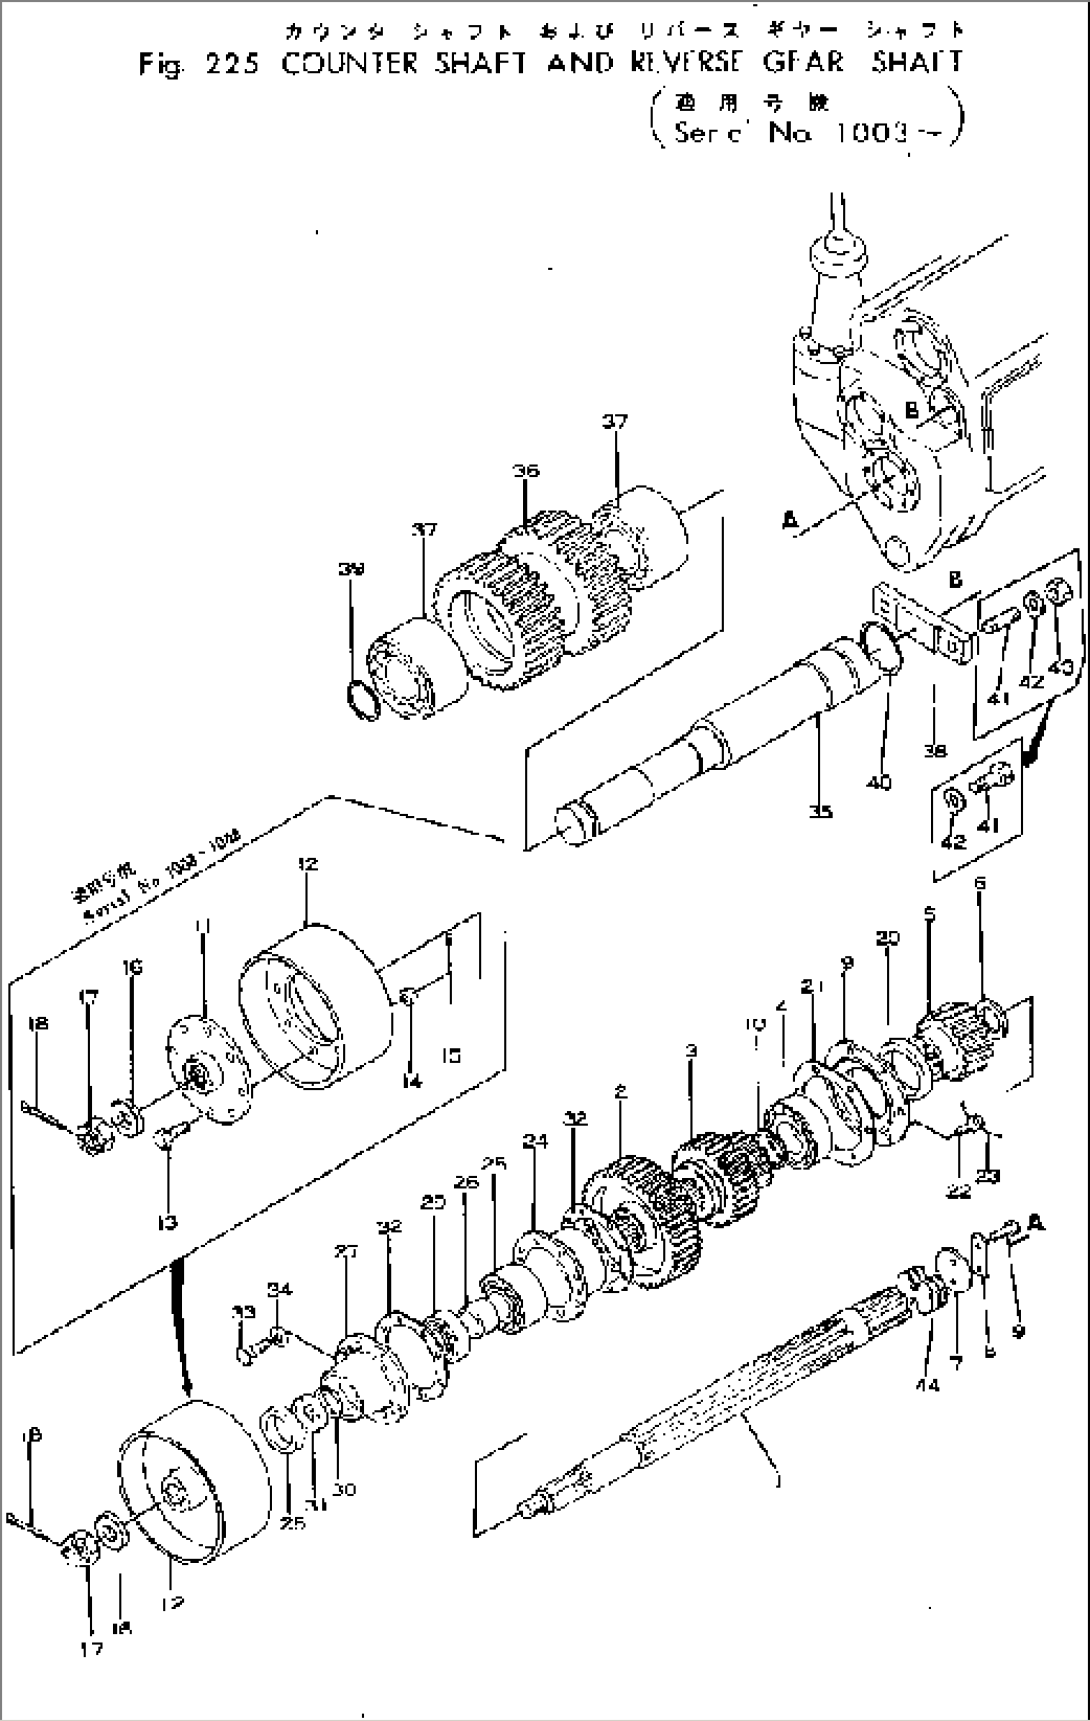 TRANSMISSION (COUNTER SHAFT AND REVERSE GEAR SHAFT)